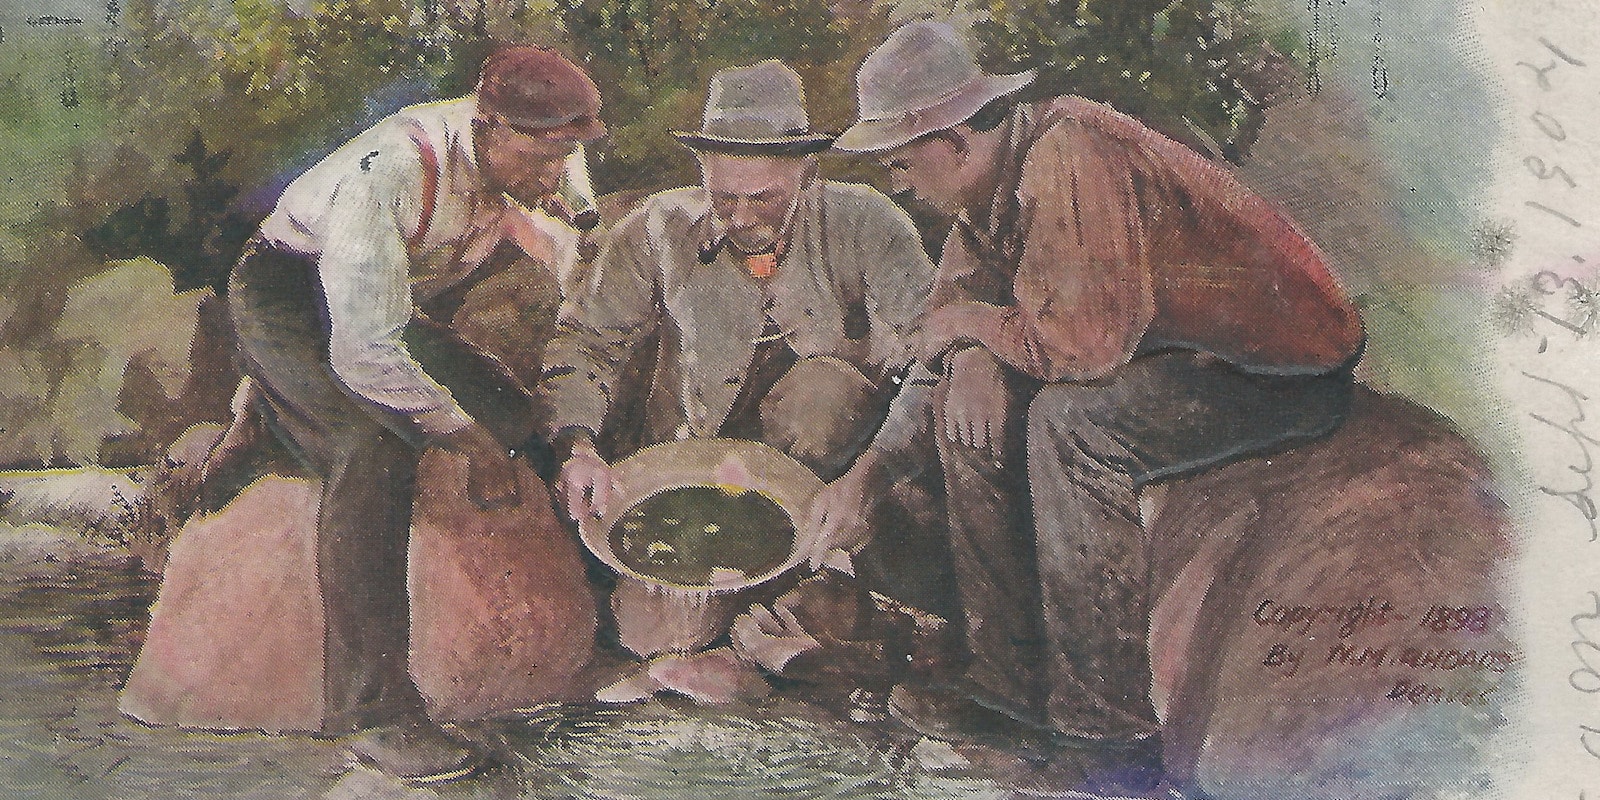 3 men gold panning in river in Cripple Creek, CO 1904